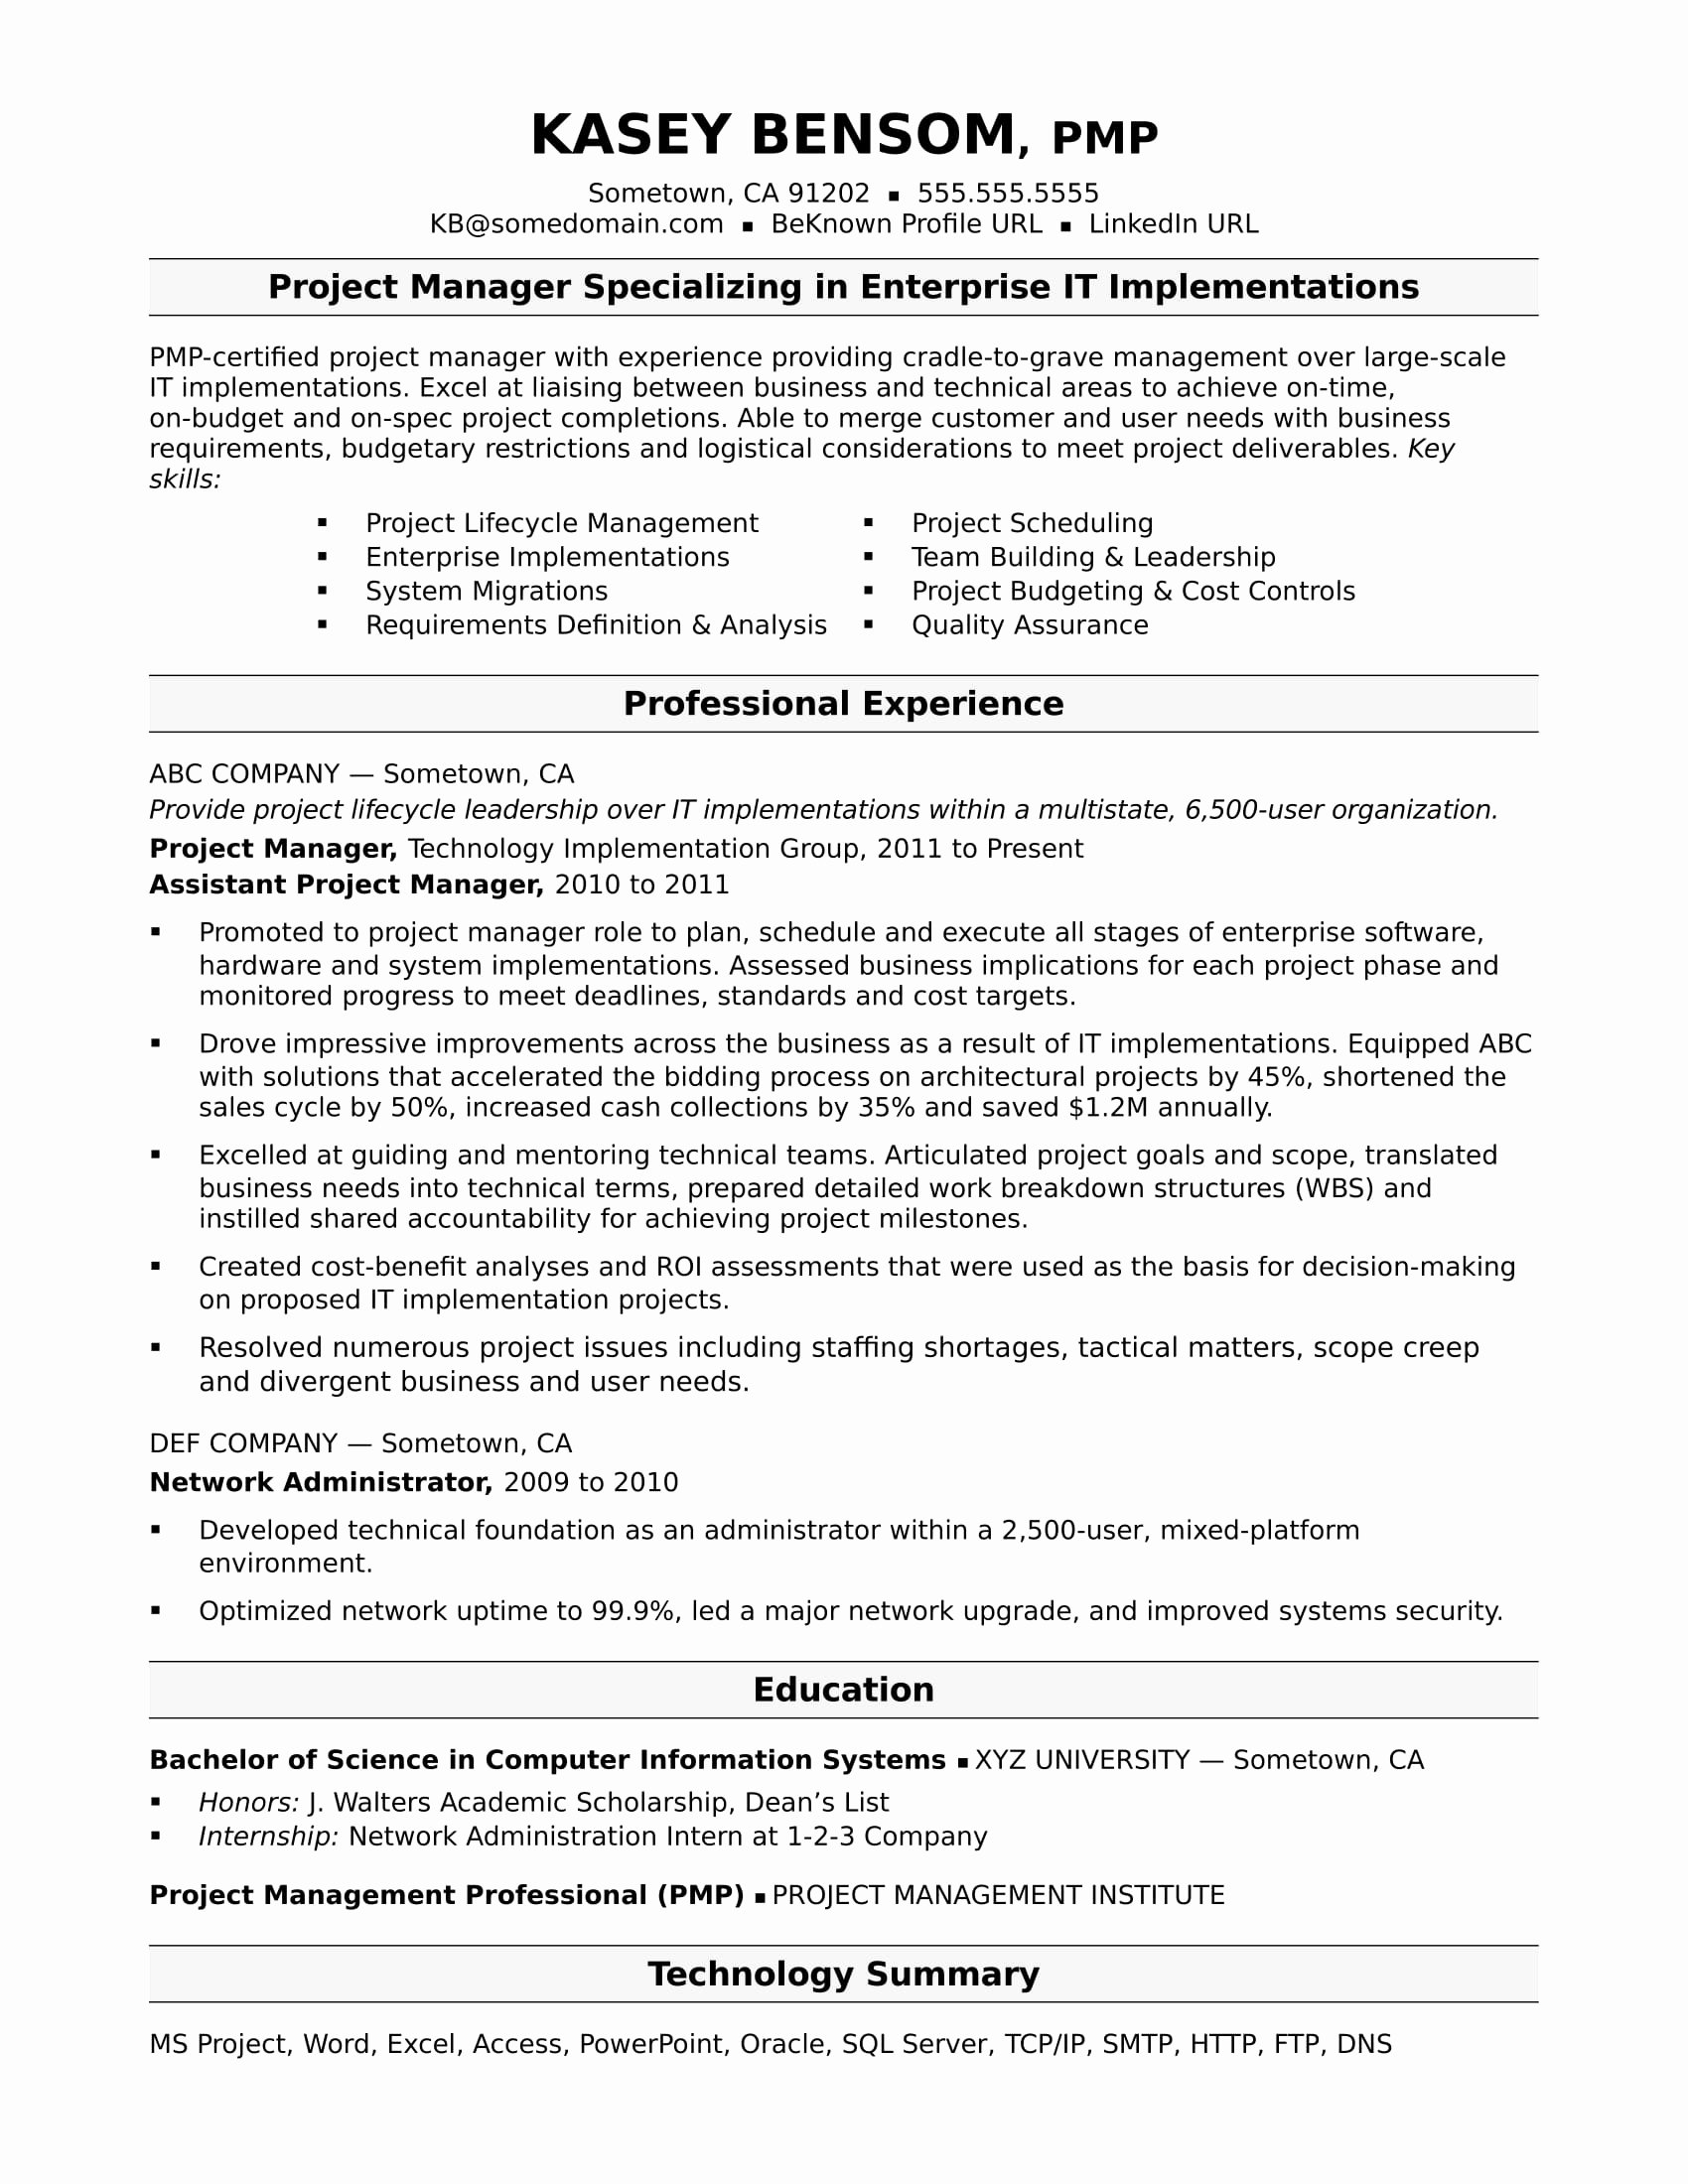 Sample Resume for A Midlevel It Project Manager